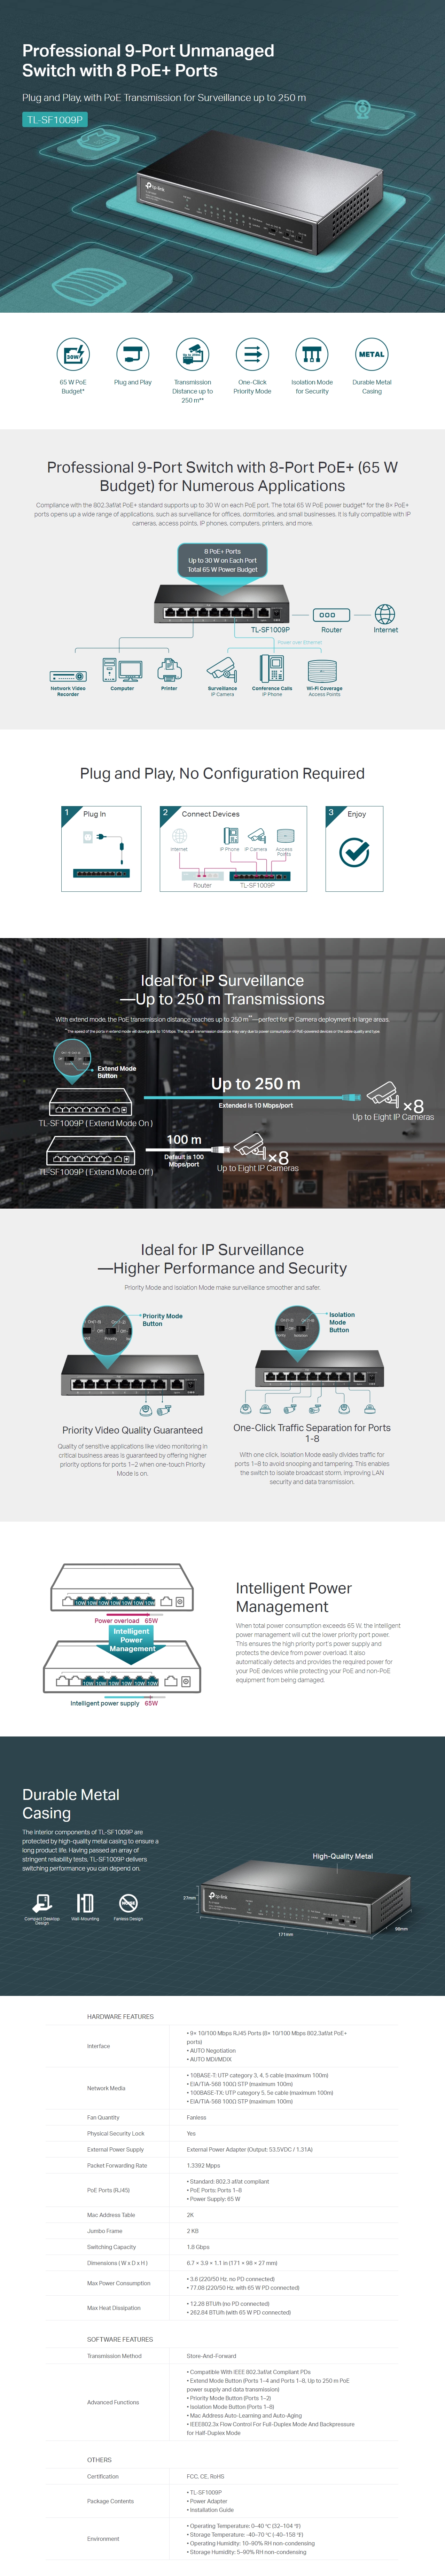 A large marketing image providing additional information about the product TP-Link SF1009P - 9-Port 10/100Mbps Desktop Switch with 8-Port PoE+ - Additional alt info not provided